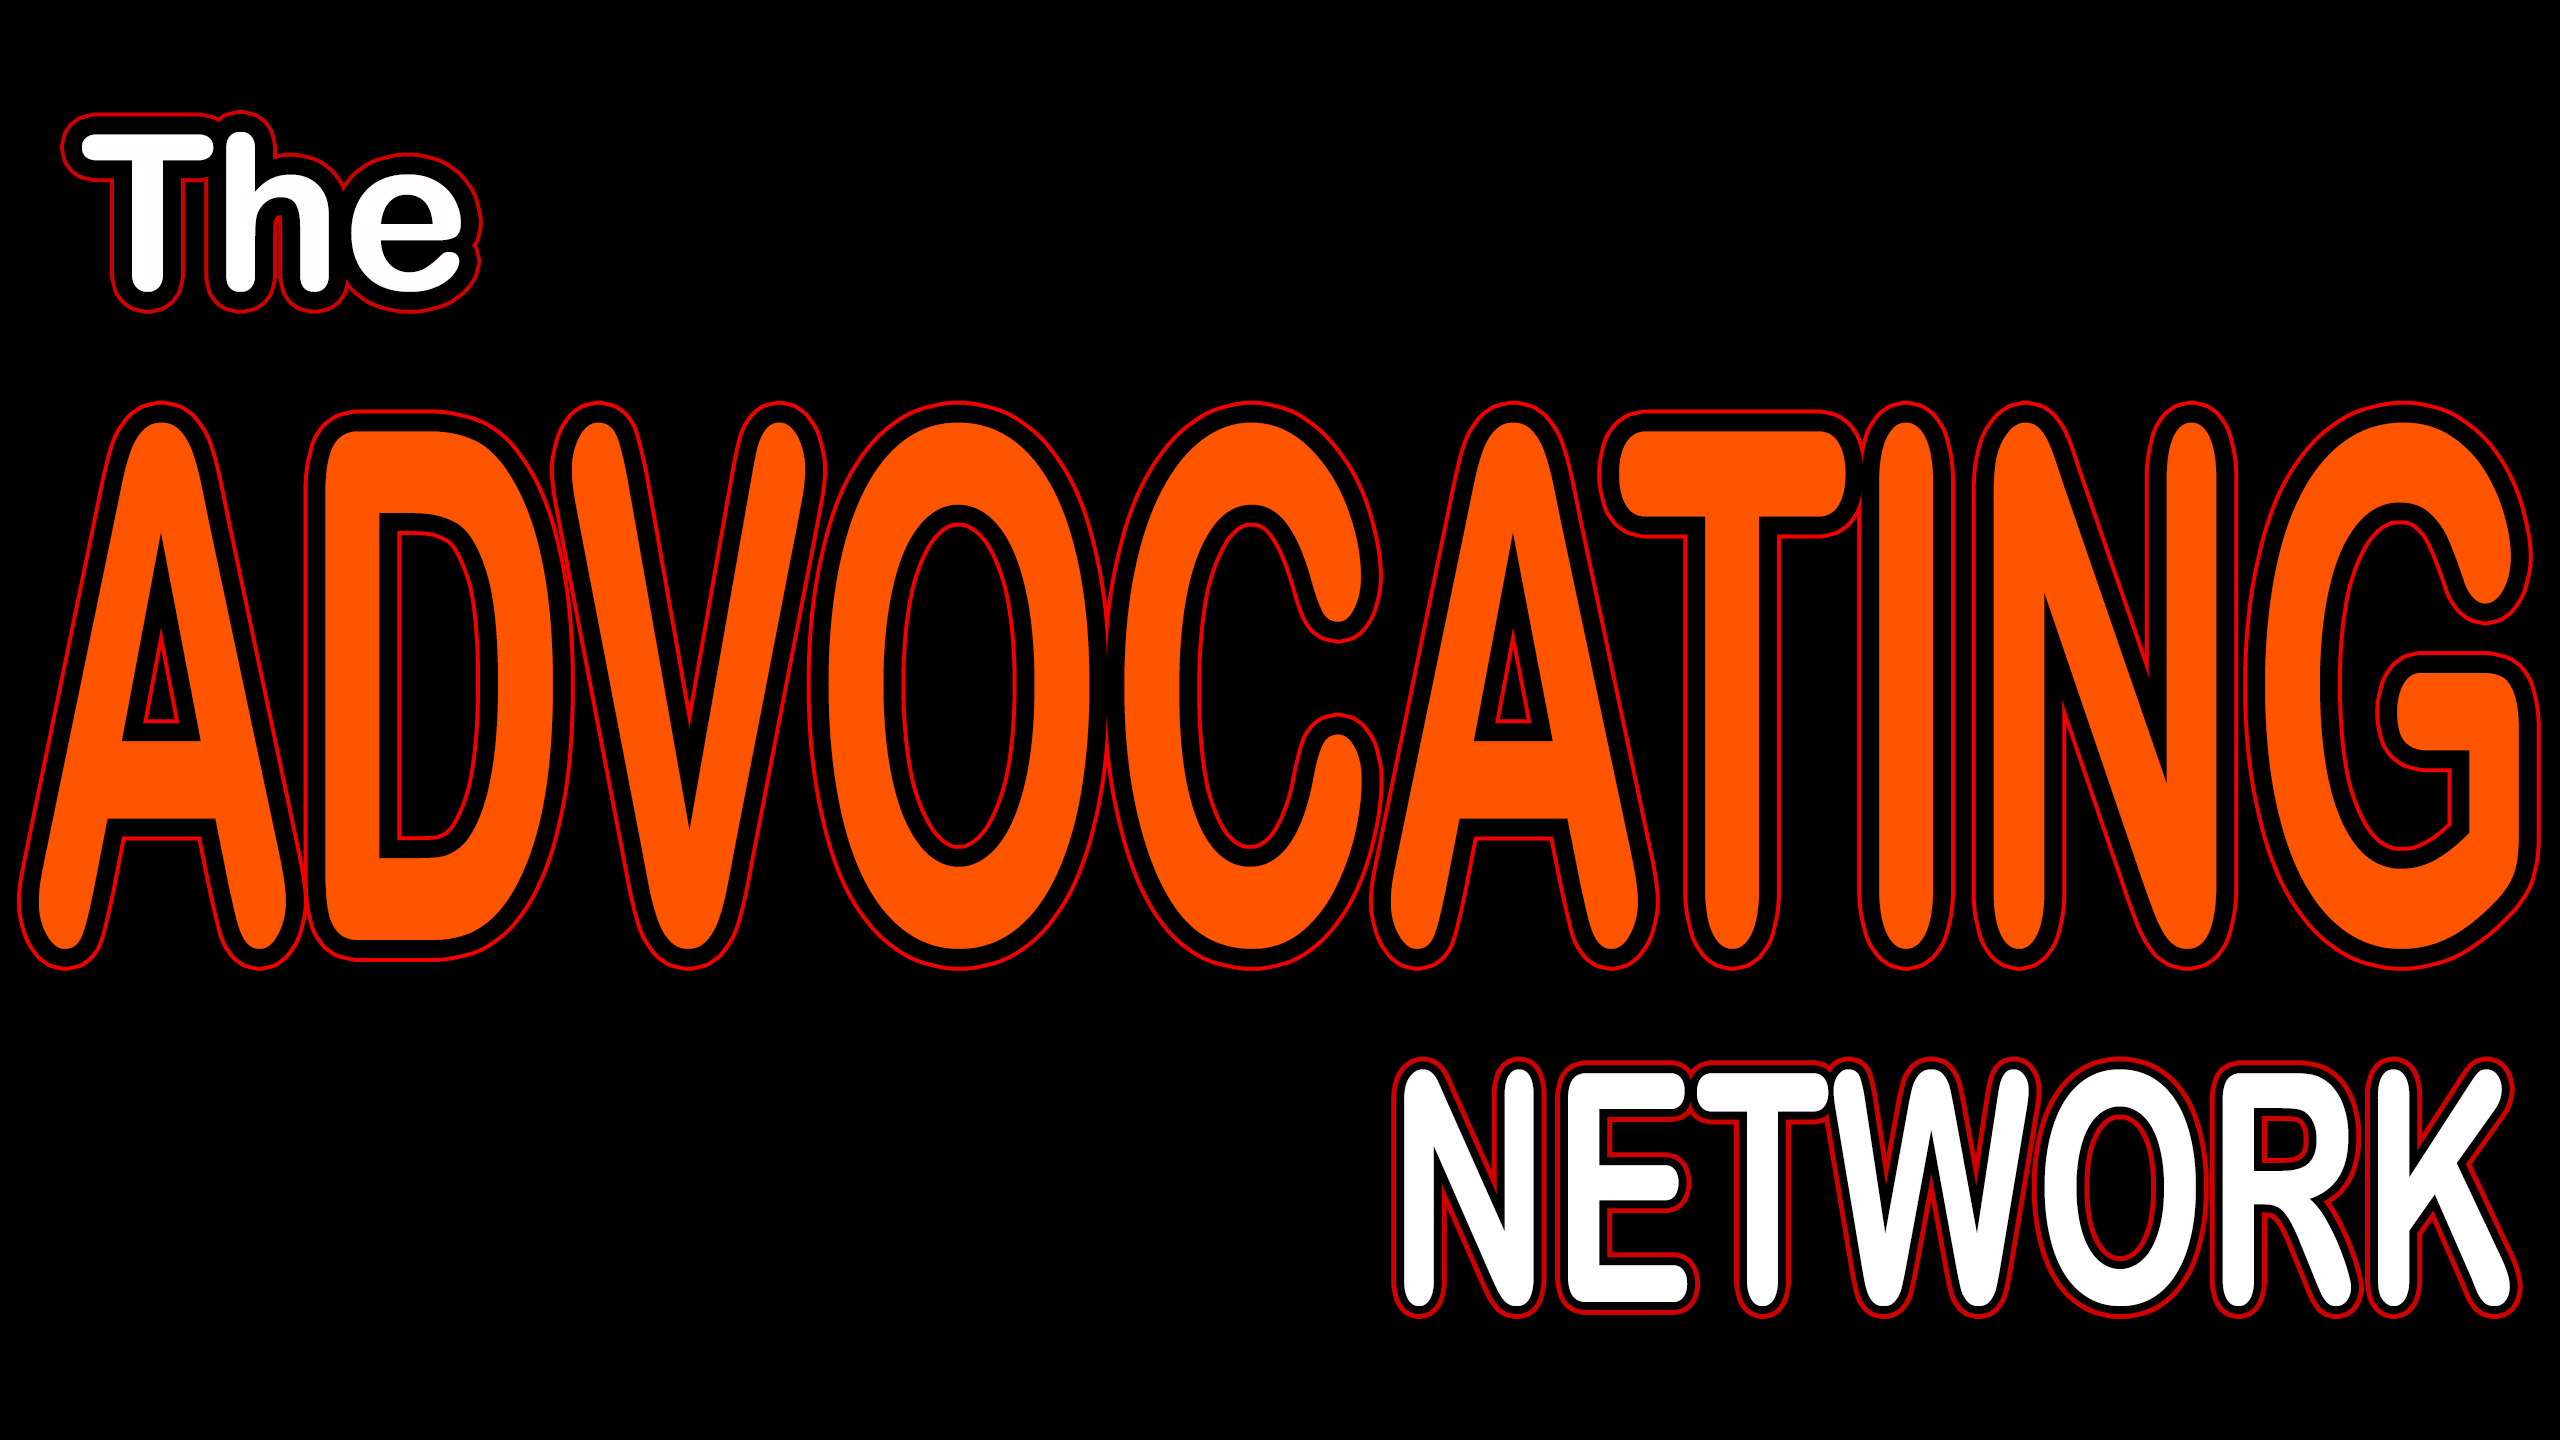 The ADVOCATING NETWORK with Show TIMES